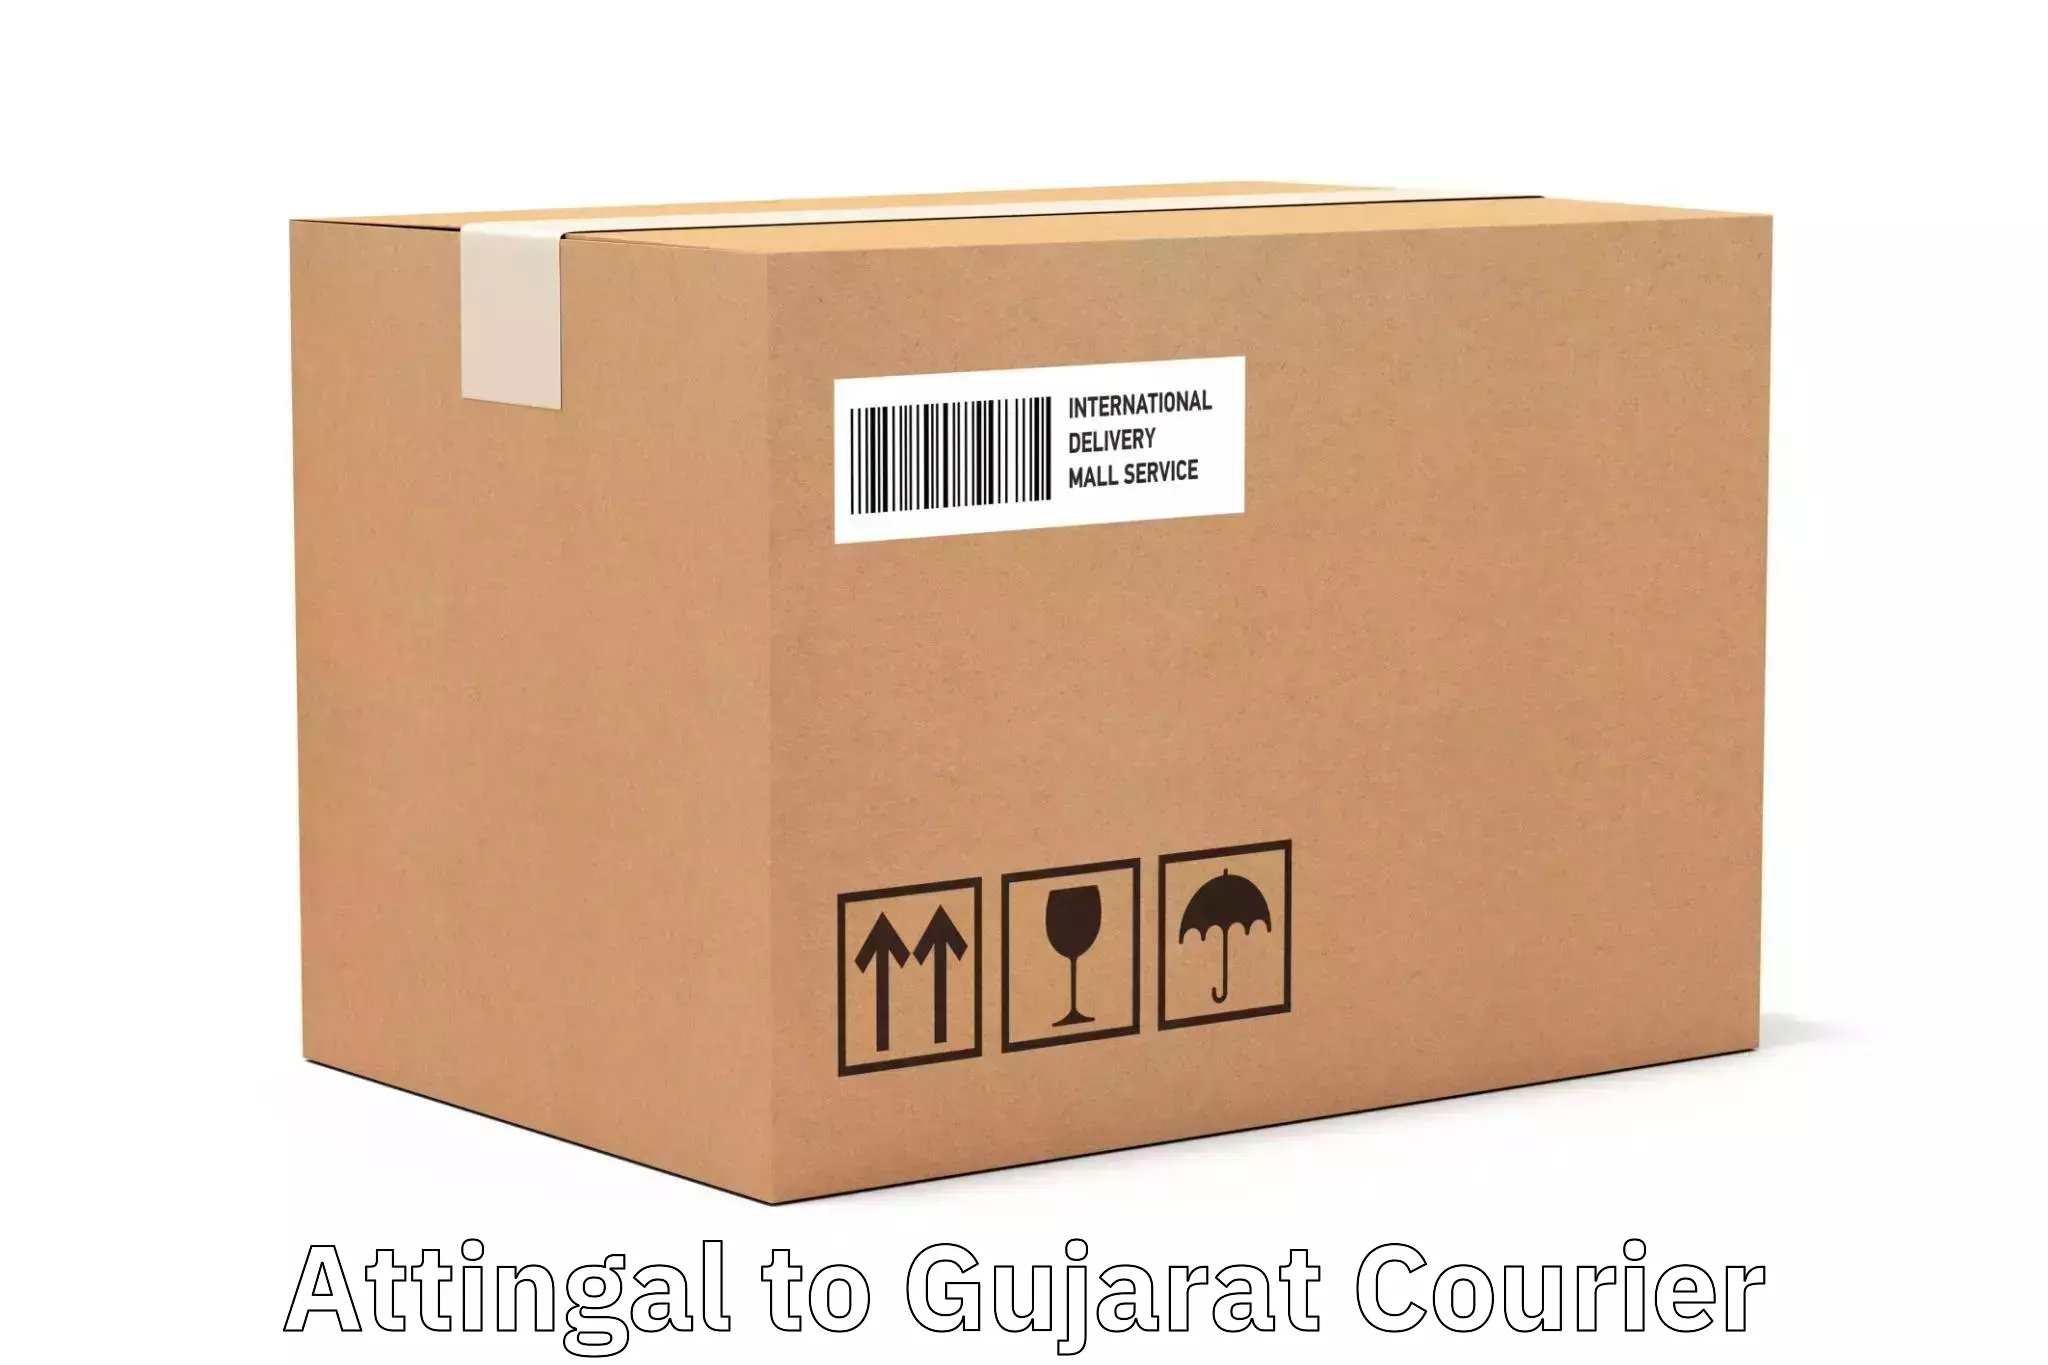 Rural area delivery Attingal to Gujarat